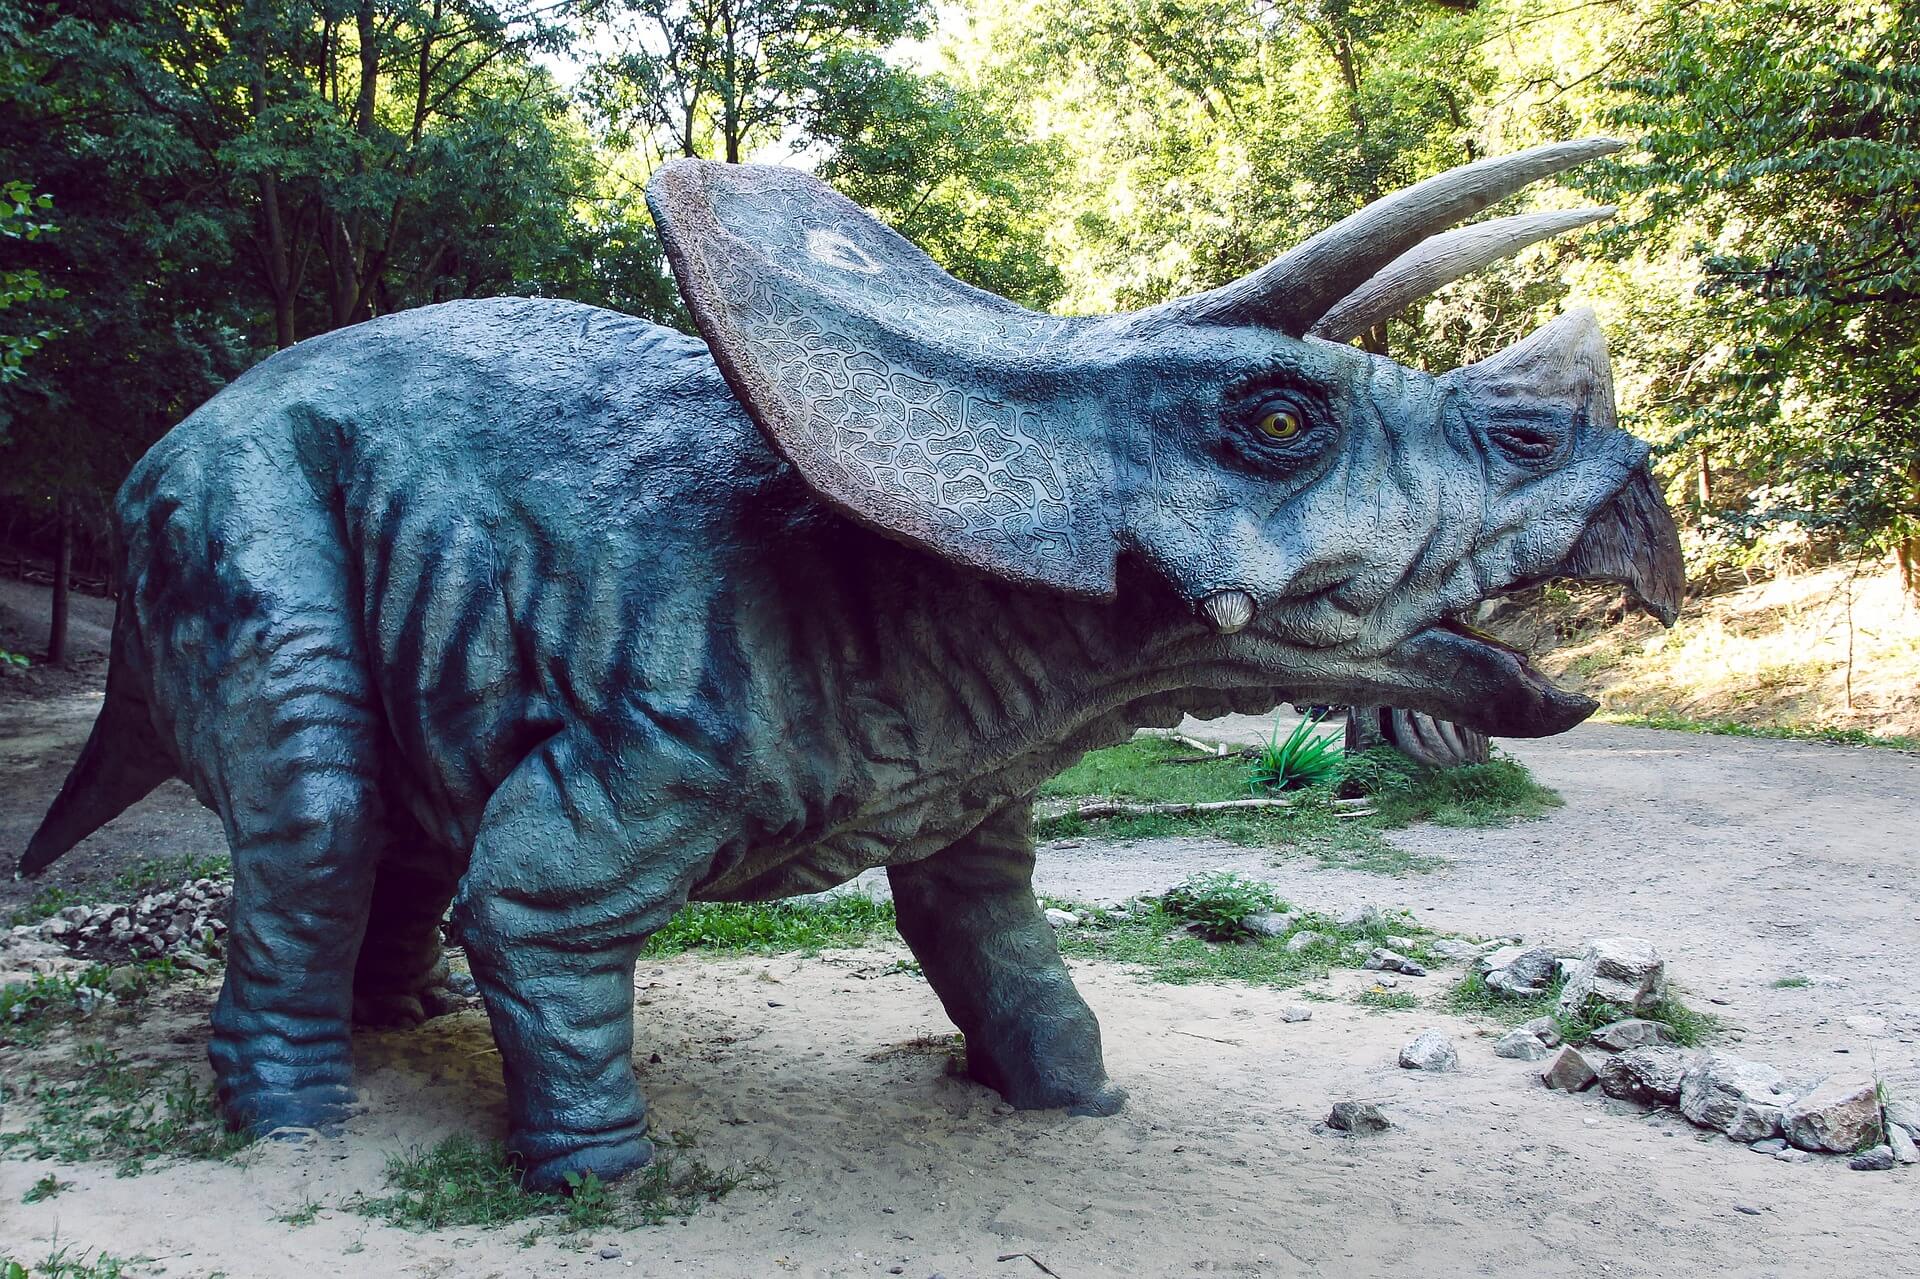 The triceratops.